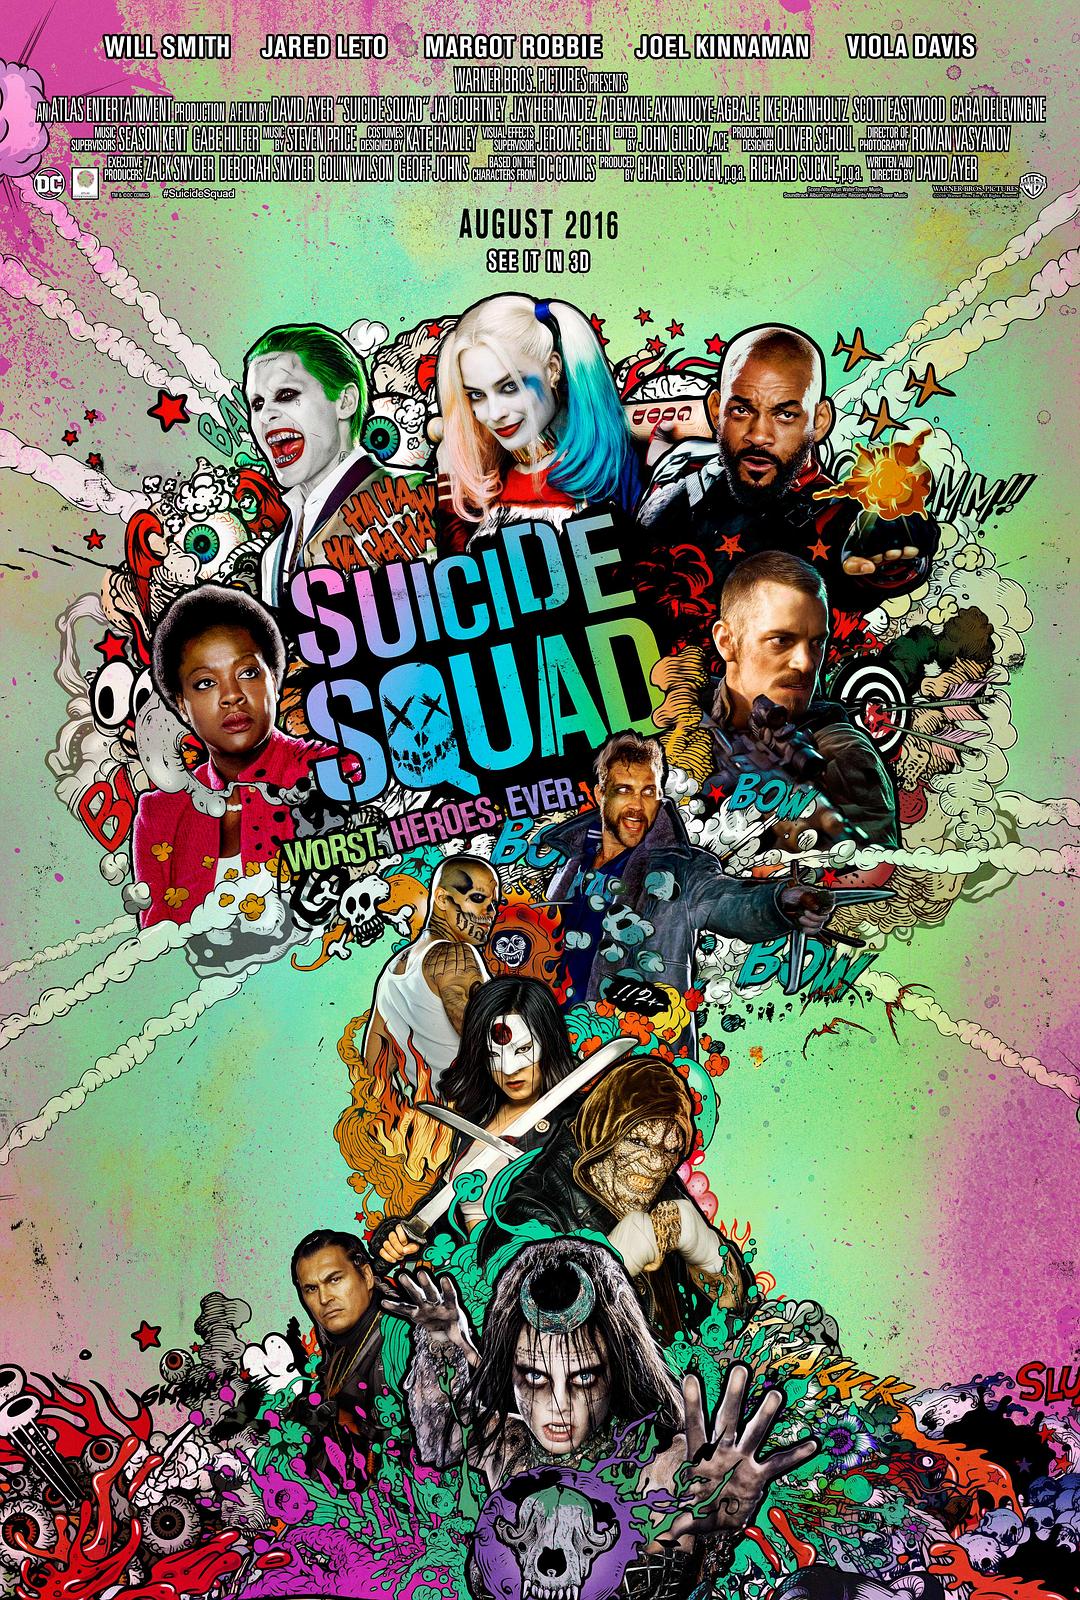 ɱС Suicide.Squad.2016.EXTENDED.1080p.BluRay.x264.DTS-HD.MA.7.1-FGT 11.61GB-1.png